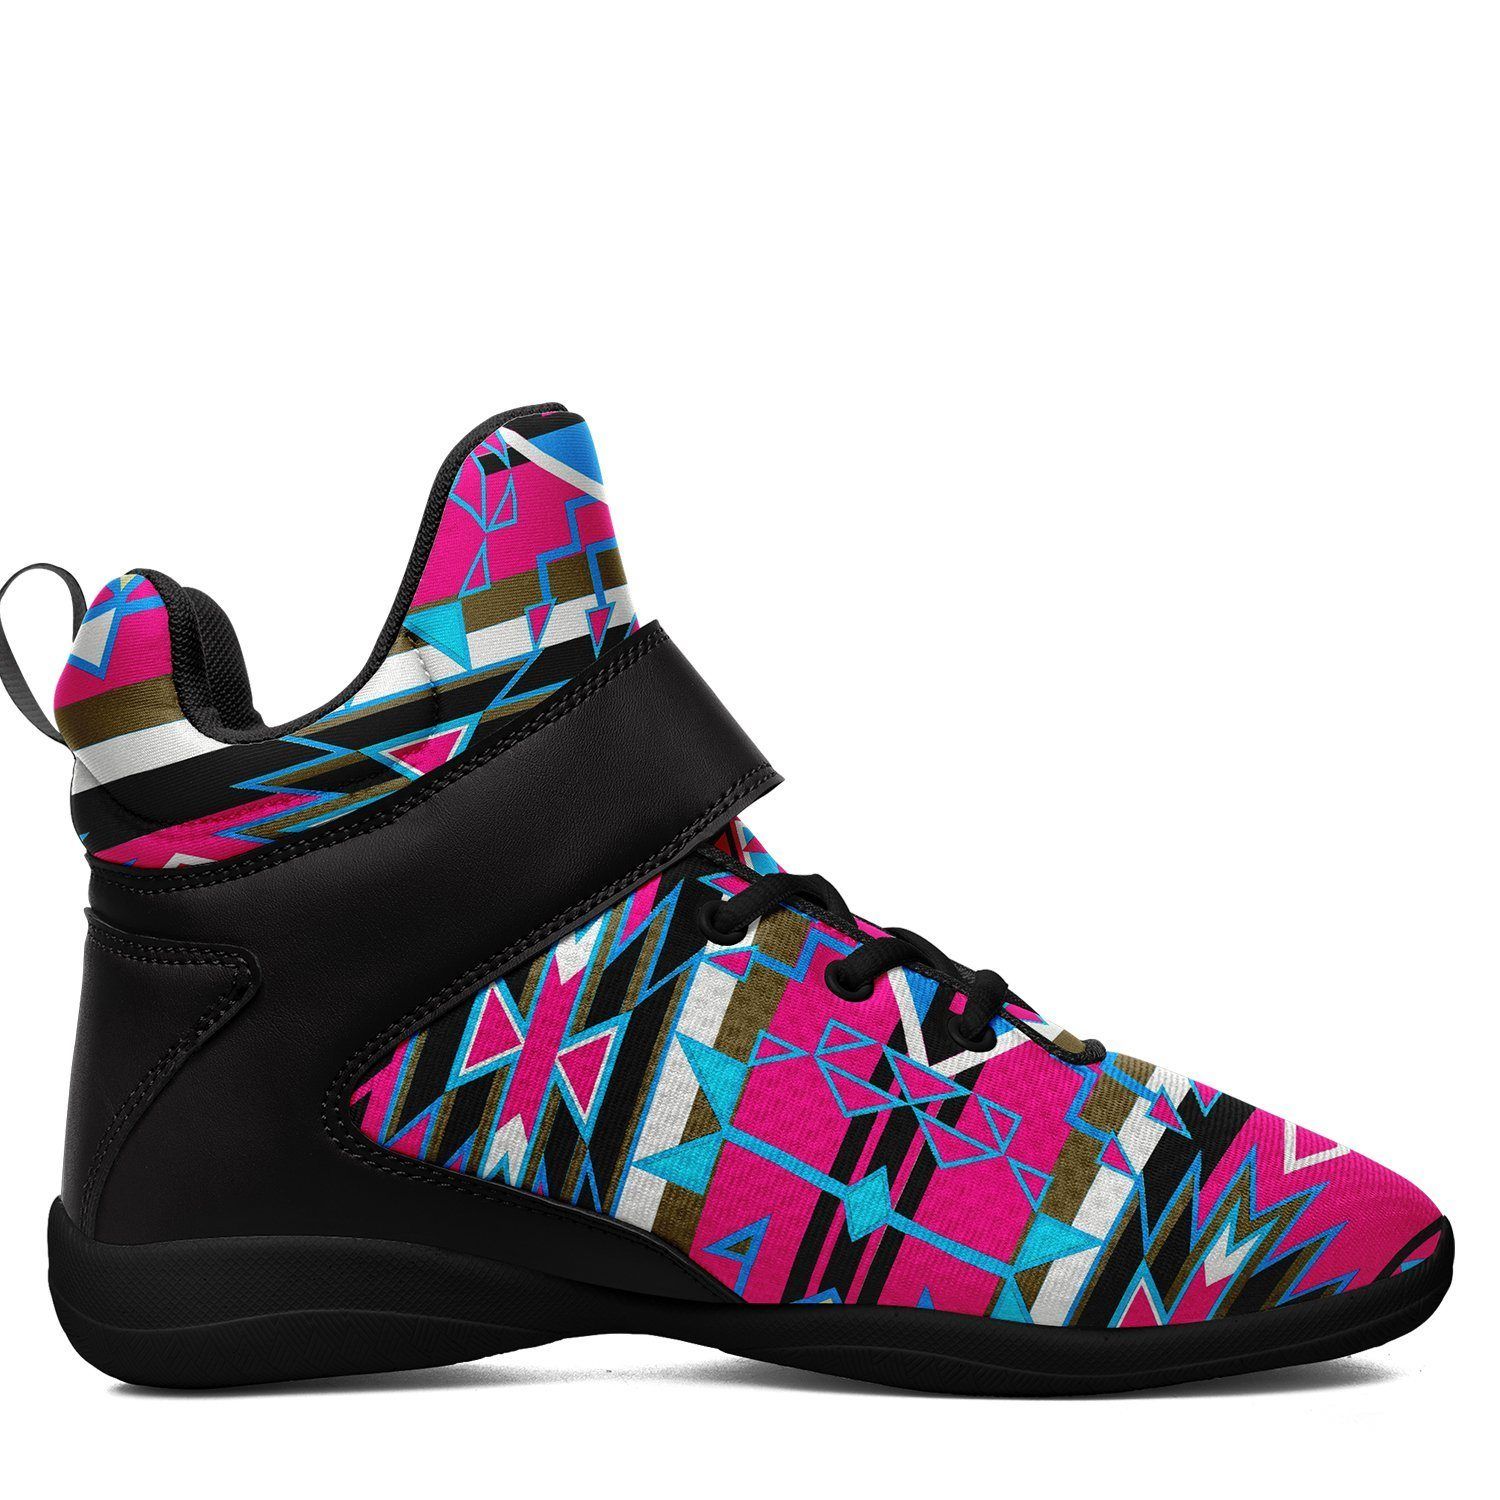 Force of Nature Sunset Storm Ipottaa Basketball / Sport High Top Shoes - Black Sole 49 Dzine 